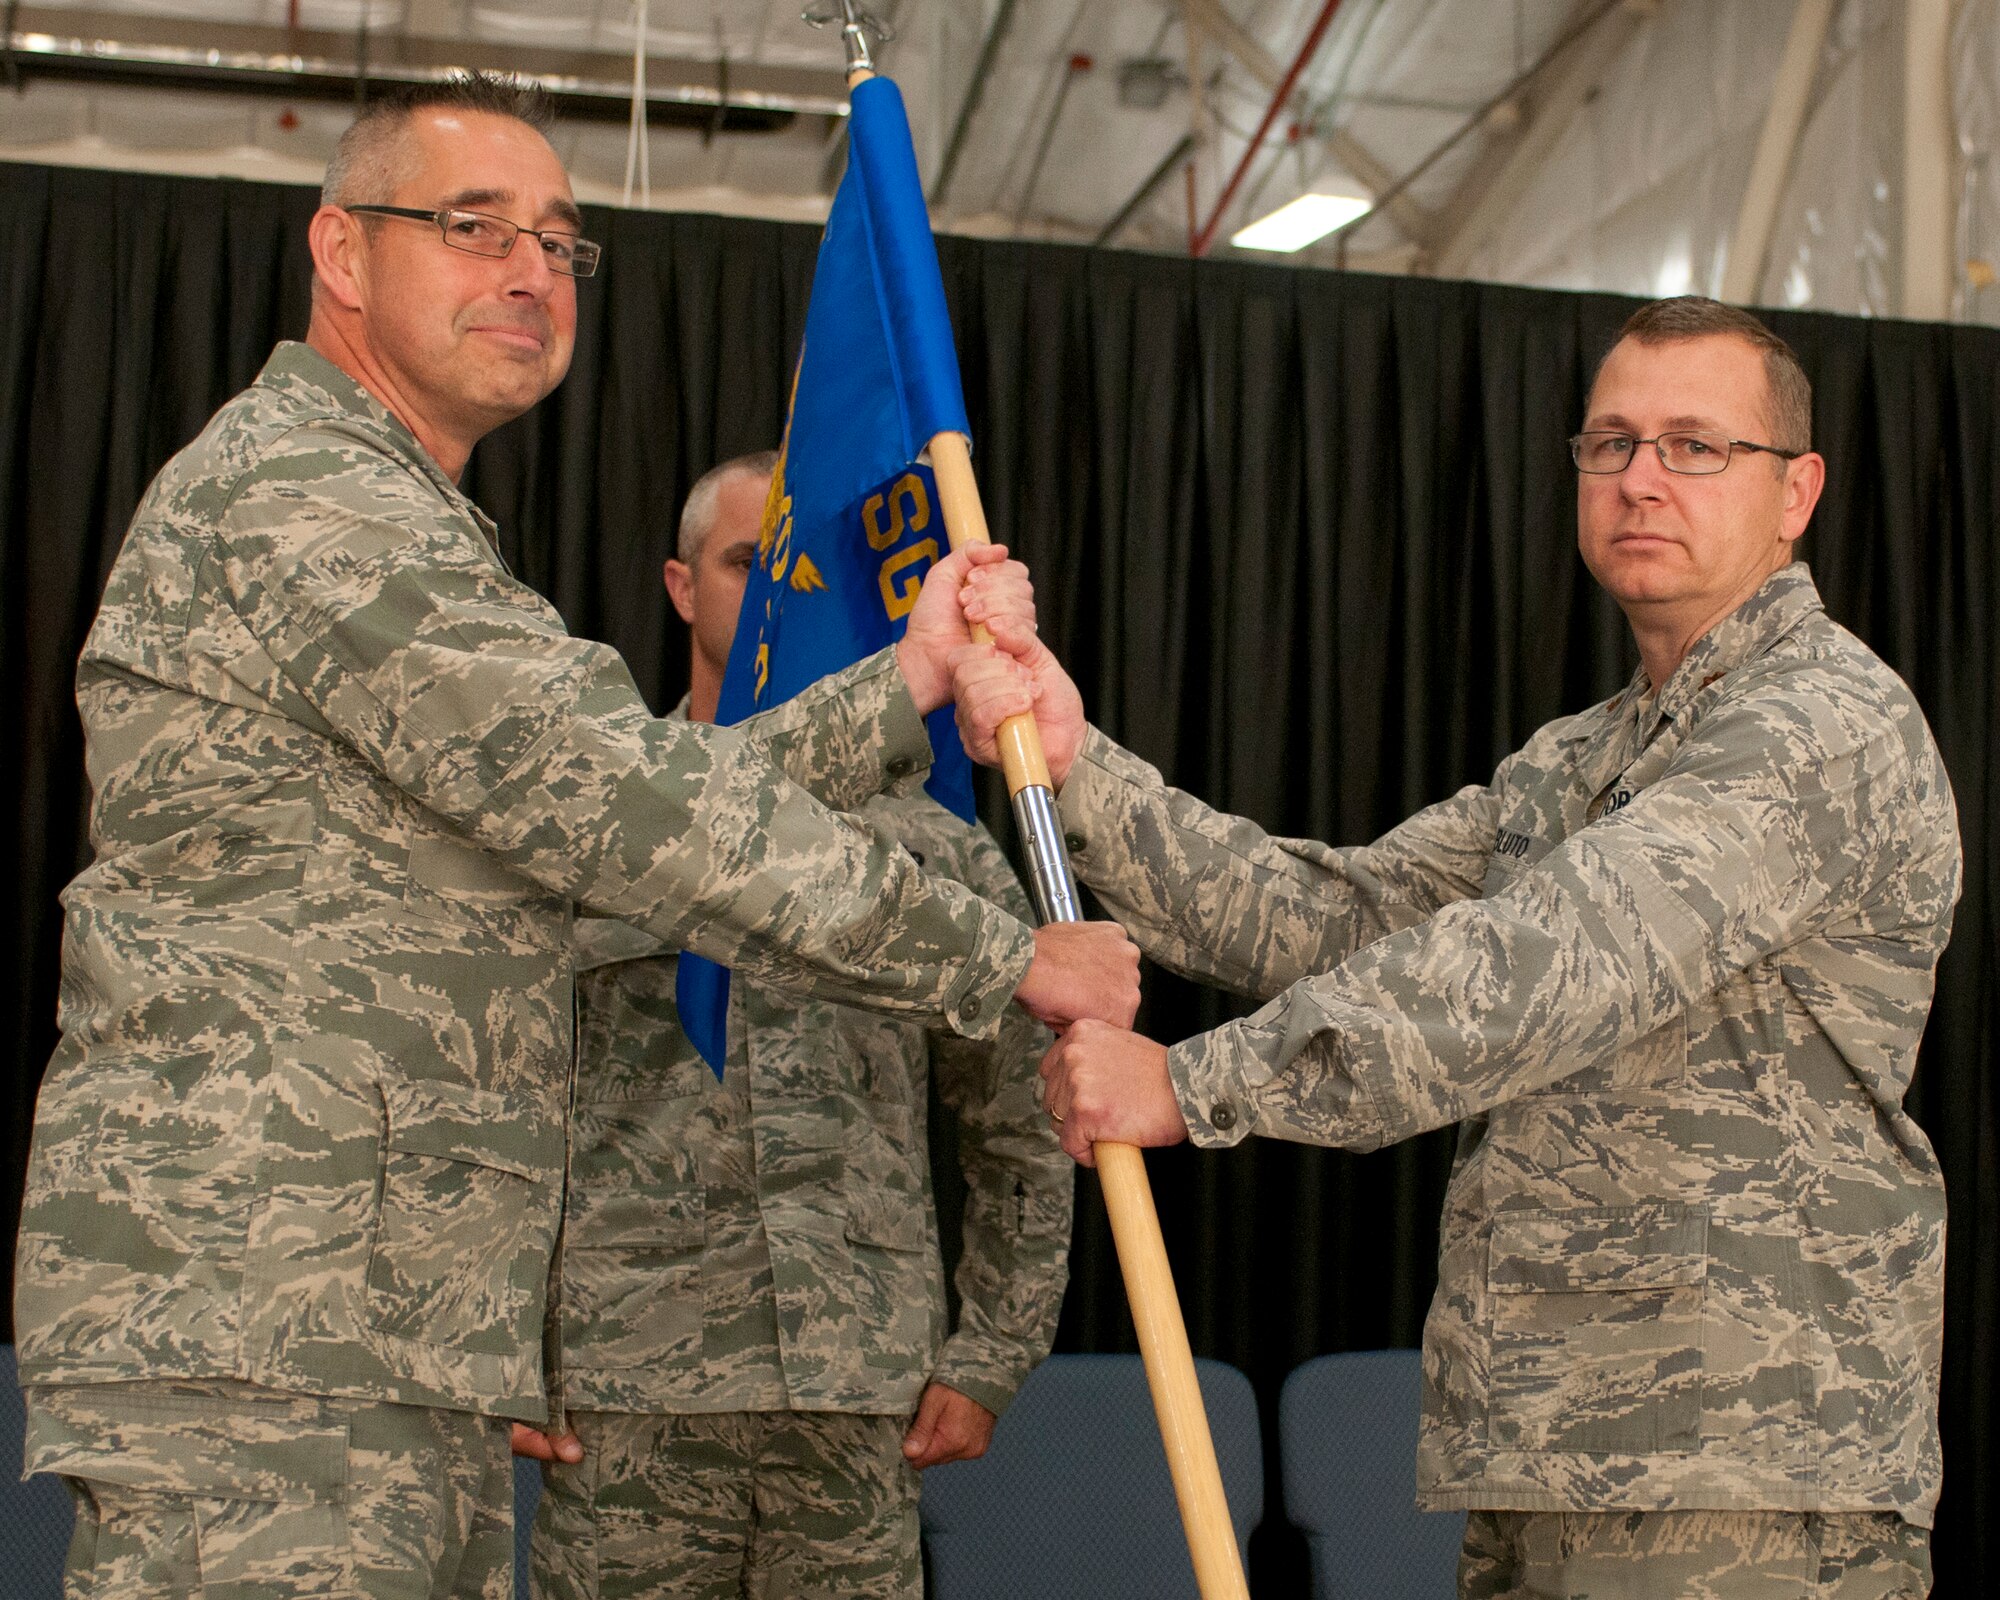 Maj. Jassen Bluto (right) accepts the 157th Security Forces Squadron gudion from Col. Paul Loiselle, 157th Mission Support Group commander, during the squadron's change of command ceremony at Pease Air National Guard Base, N.H., Oct. 3, 2014.  Bluto took command of the squadron from outgoing commander, Maj. Kenneth Leedberg.  (U.S. Air National Guard photo by Staff Sgt. Curtis J. Lenz)